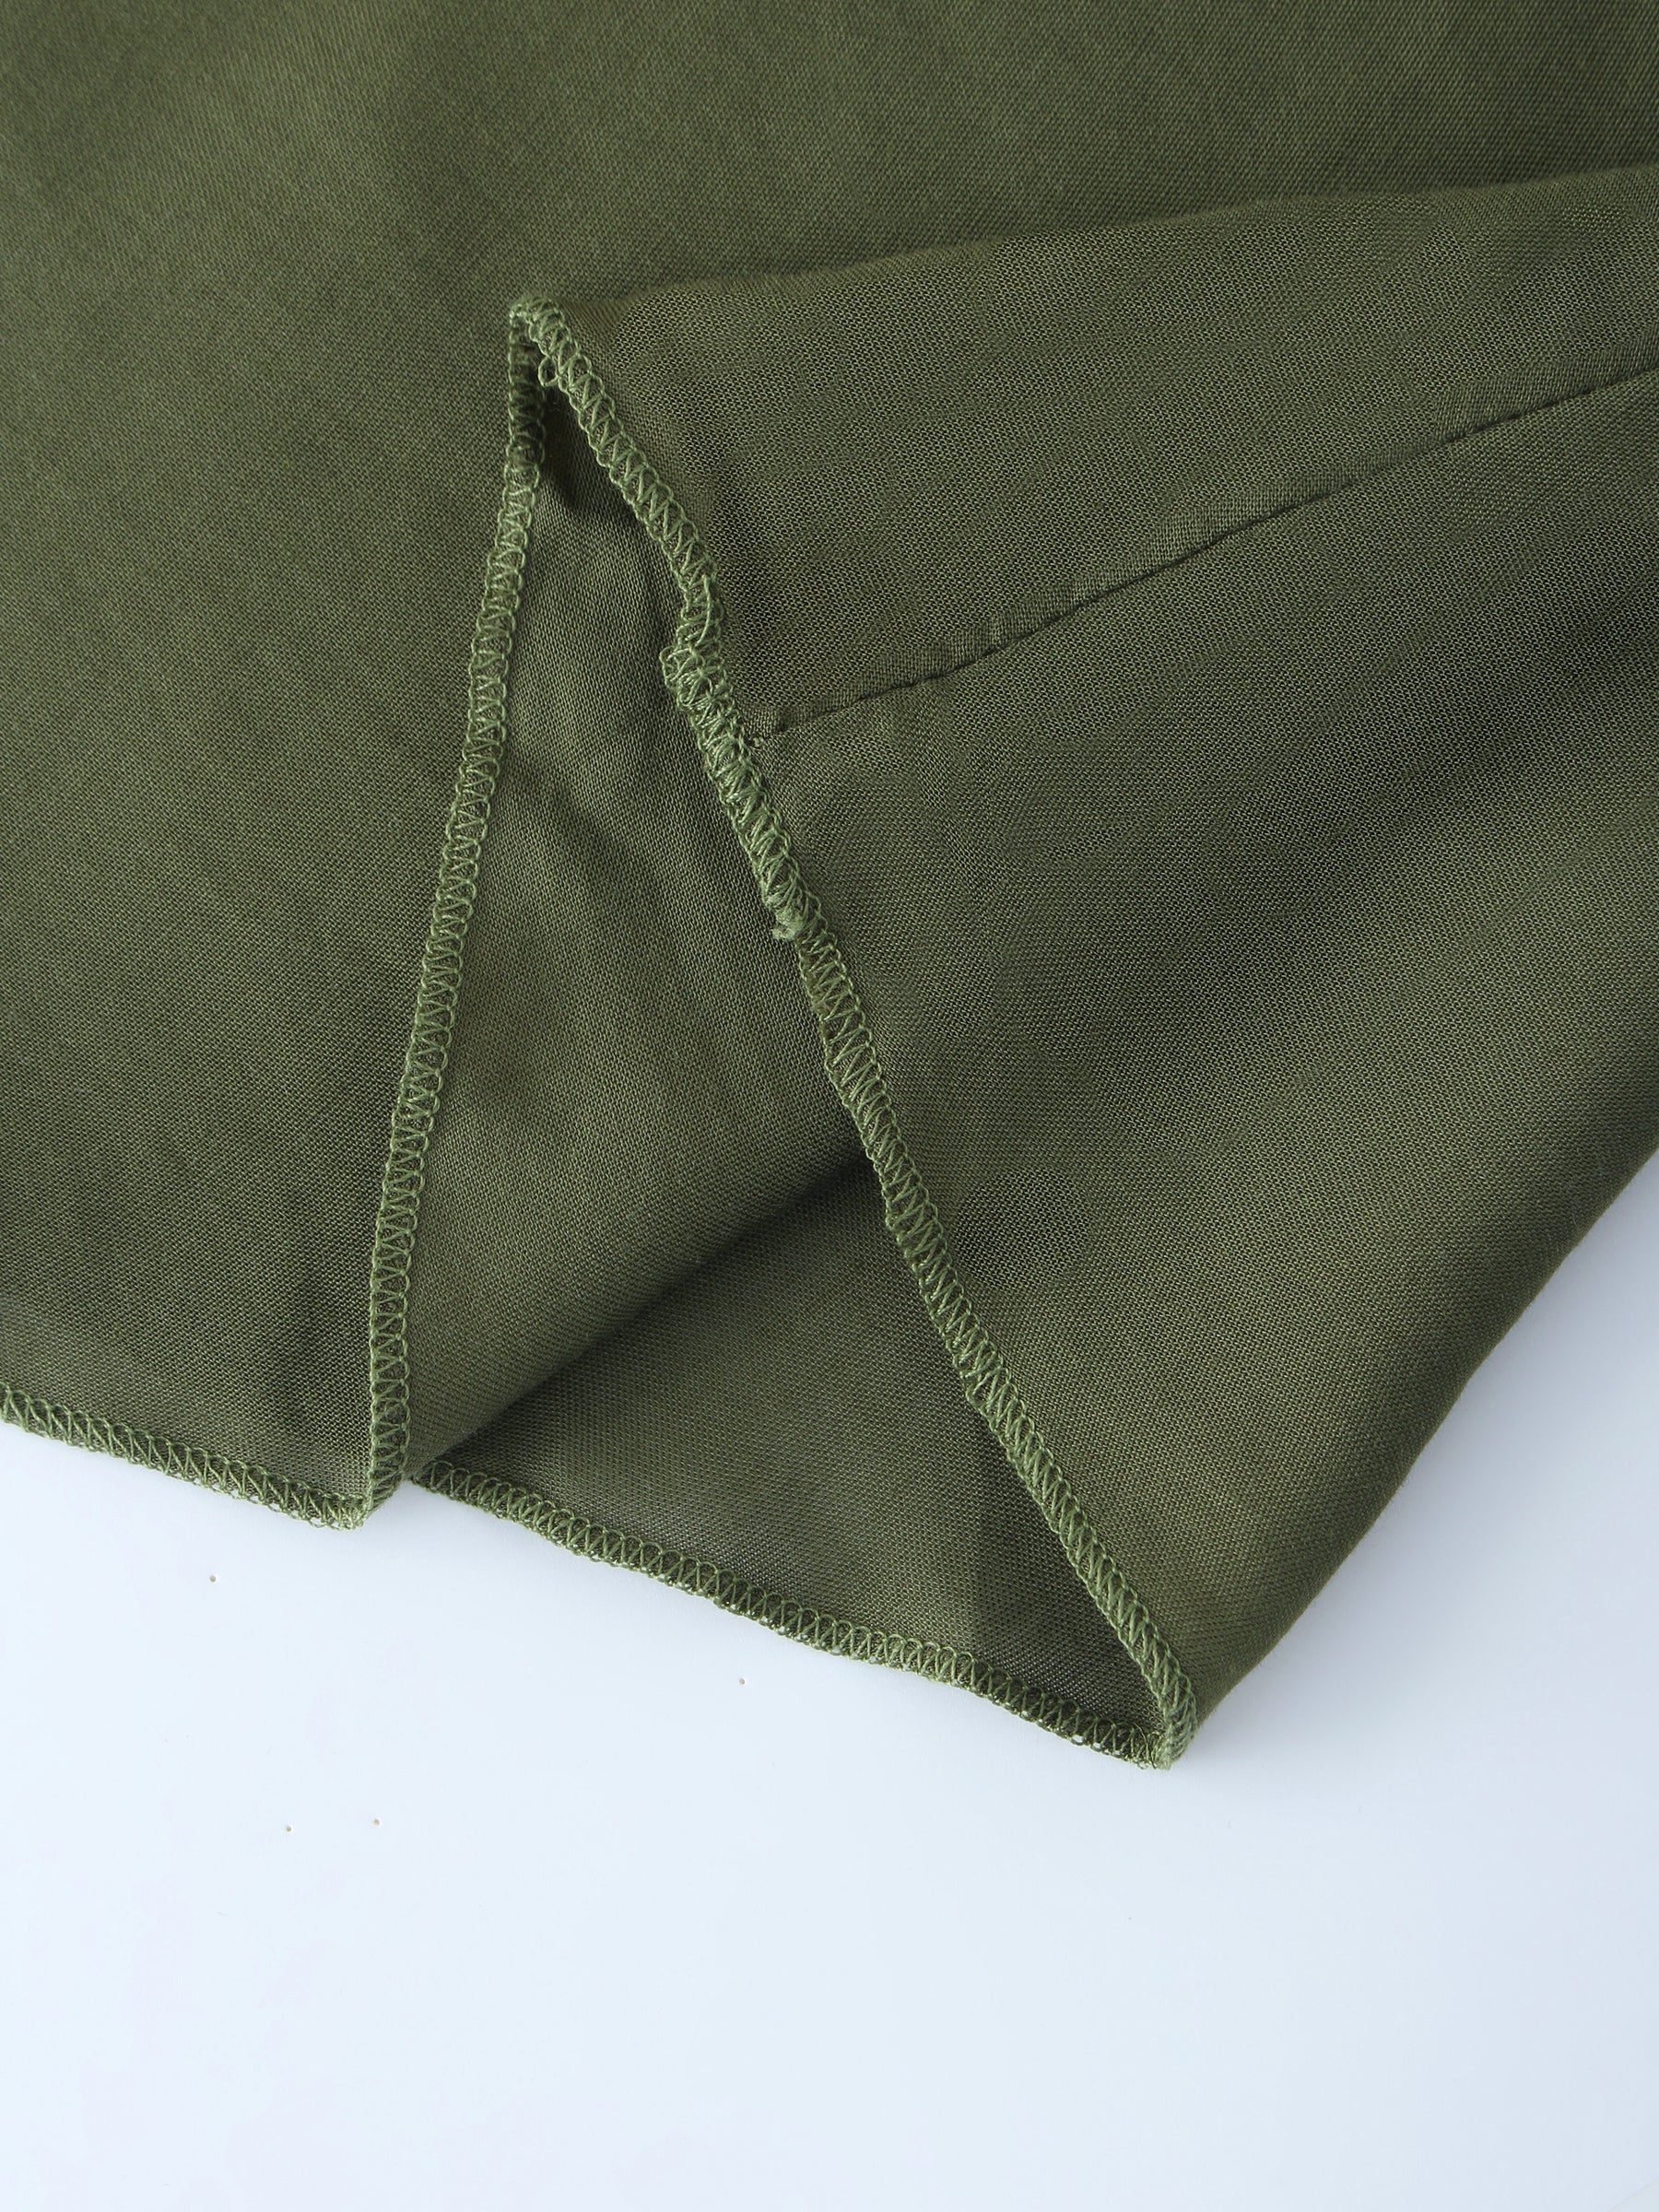 DOUBLE LAYER SKIRT-OLIVE